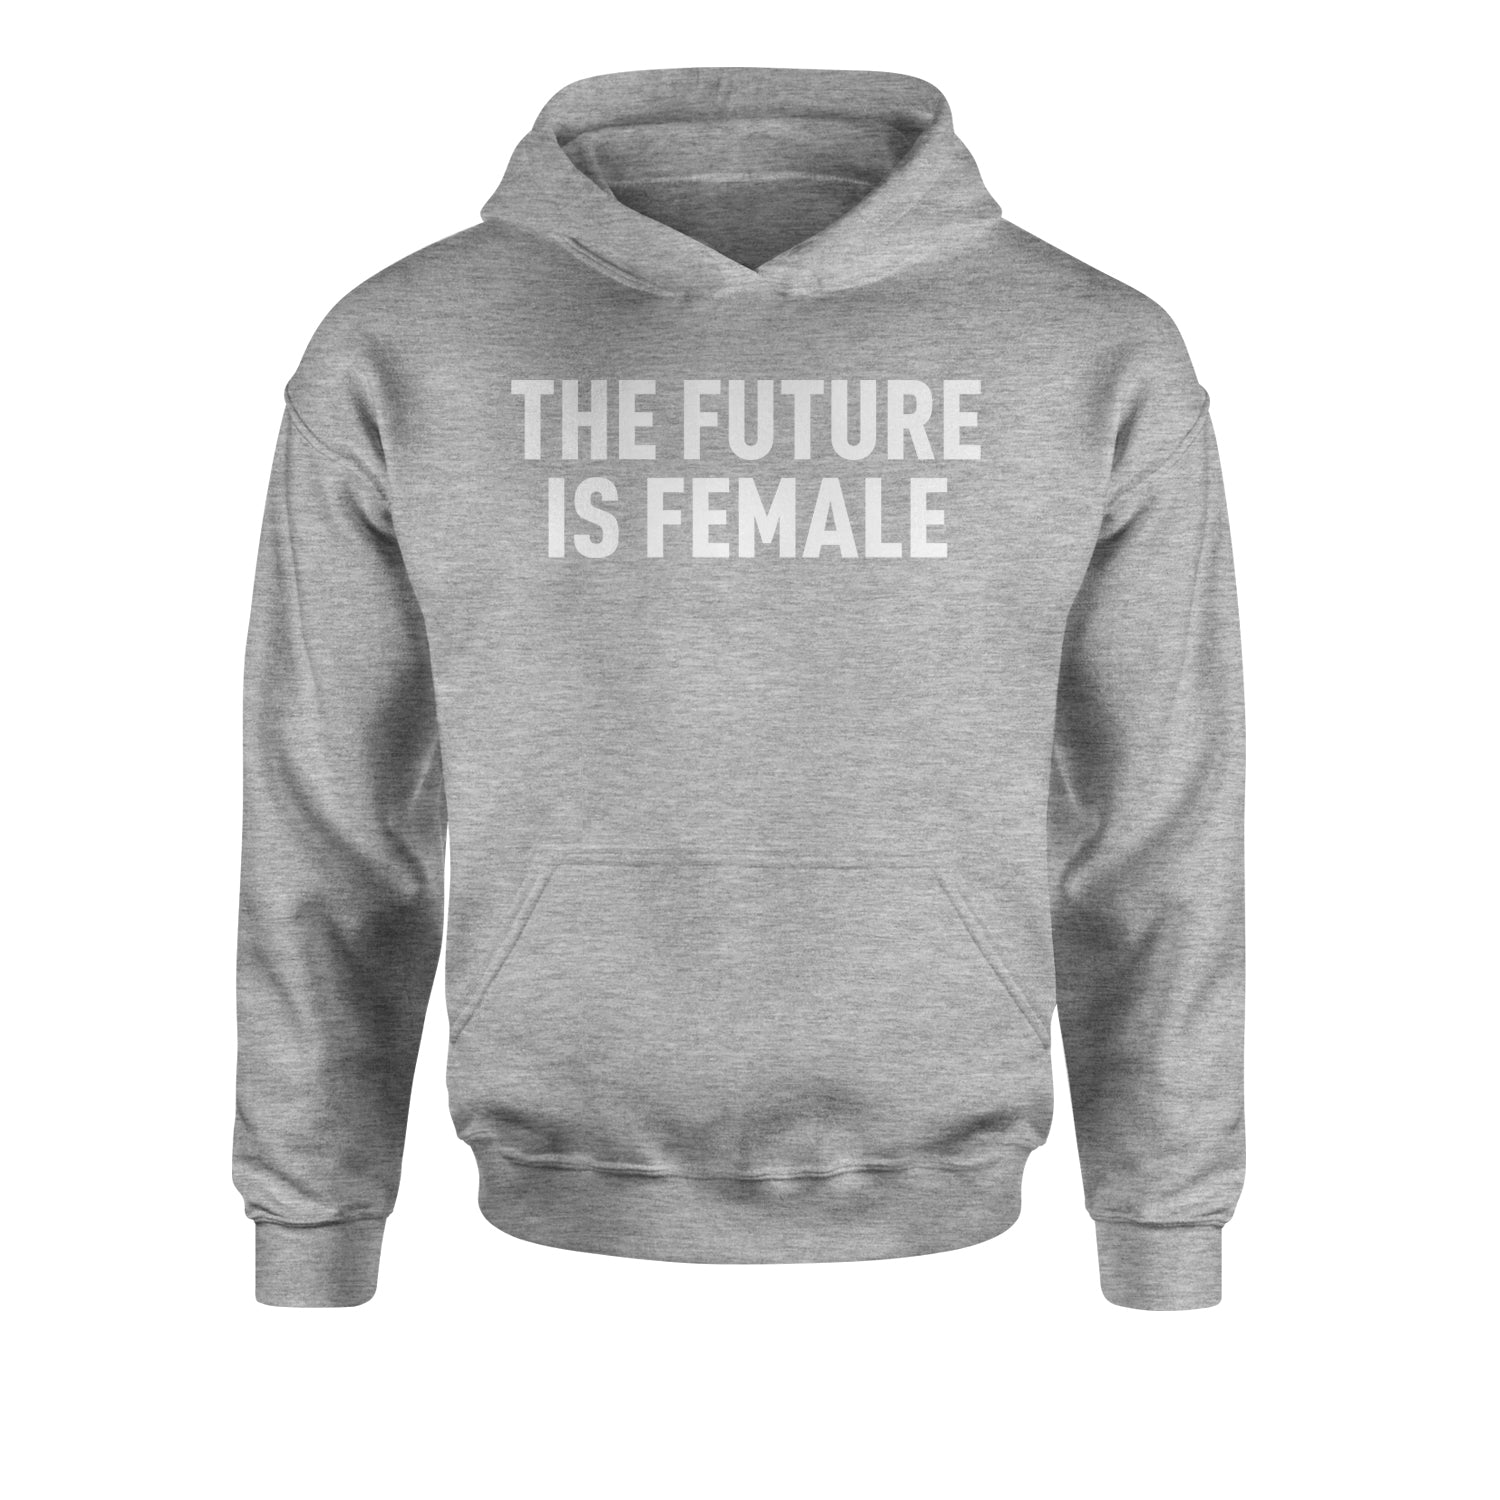 The Future Is Female Feminism Youth-Sized Hoodie female, feminism, feminist, femme, future, is, liberation, suffrage, the by Expression Tees